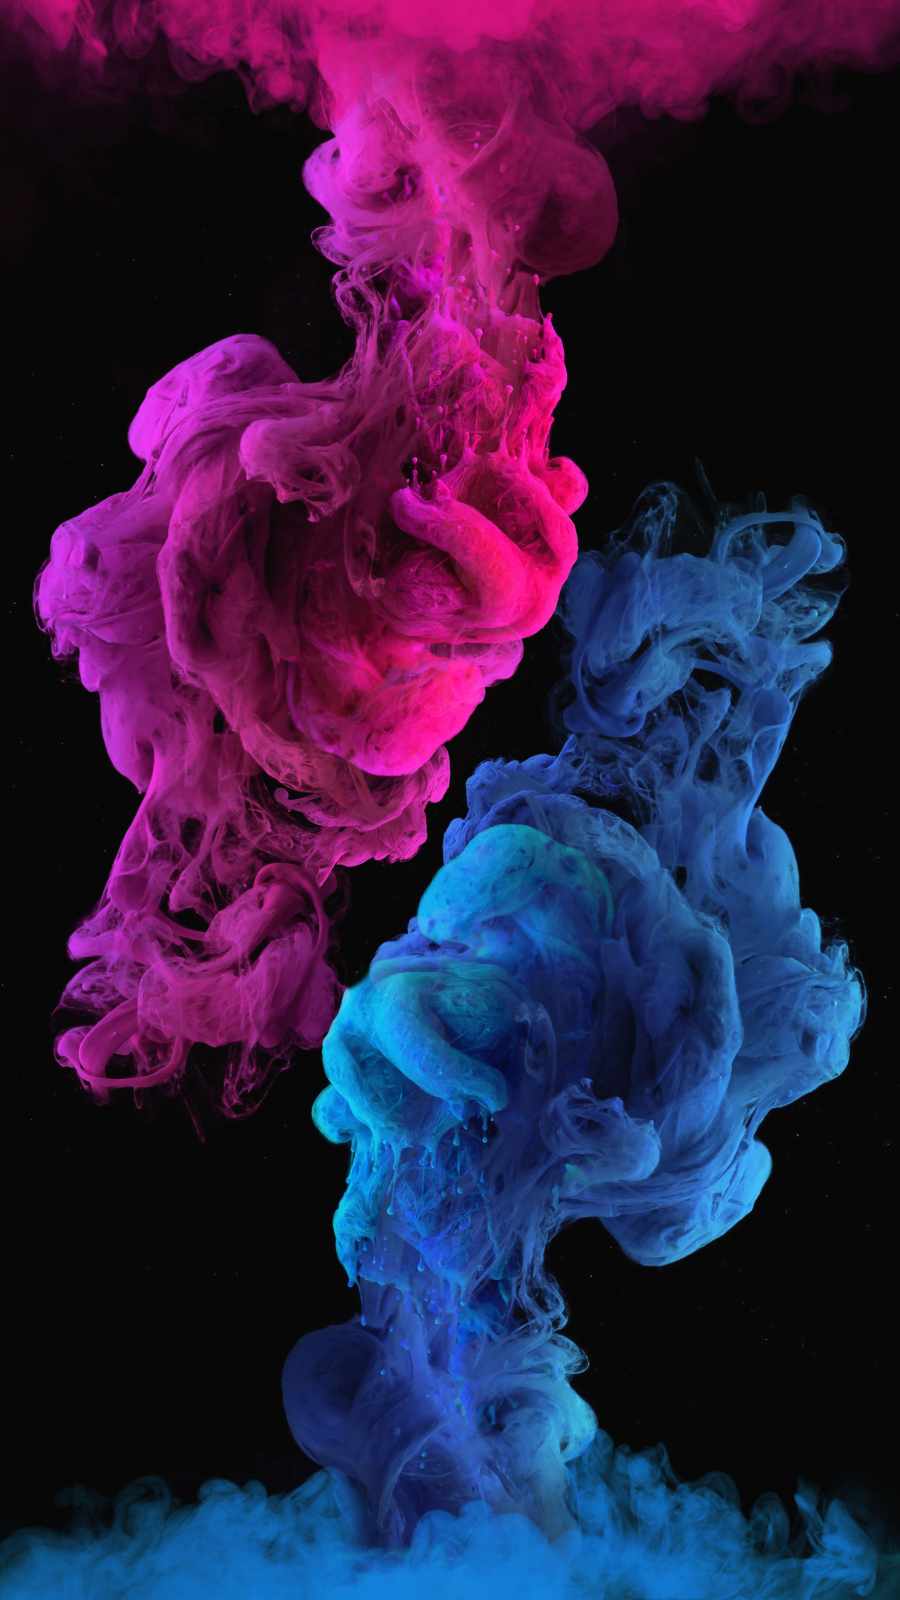 Color Smoke Bomb - IPhone Wallpapers : iPhone Wallpapers